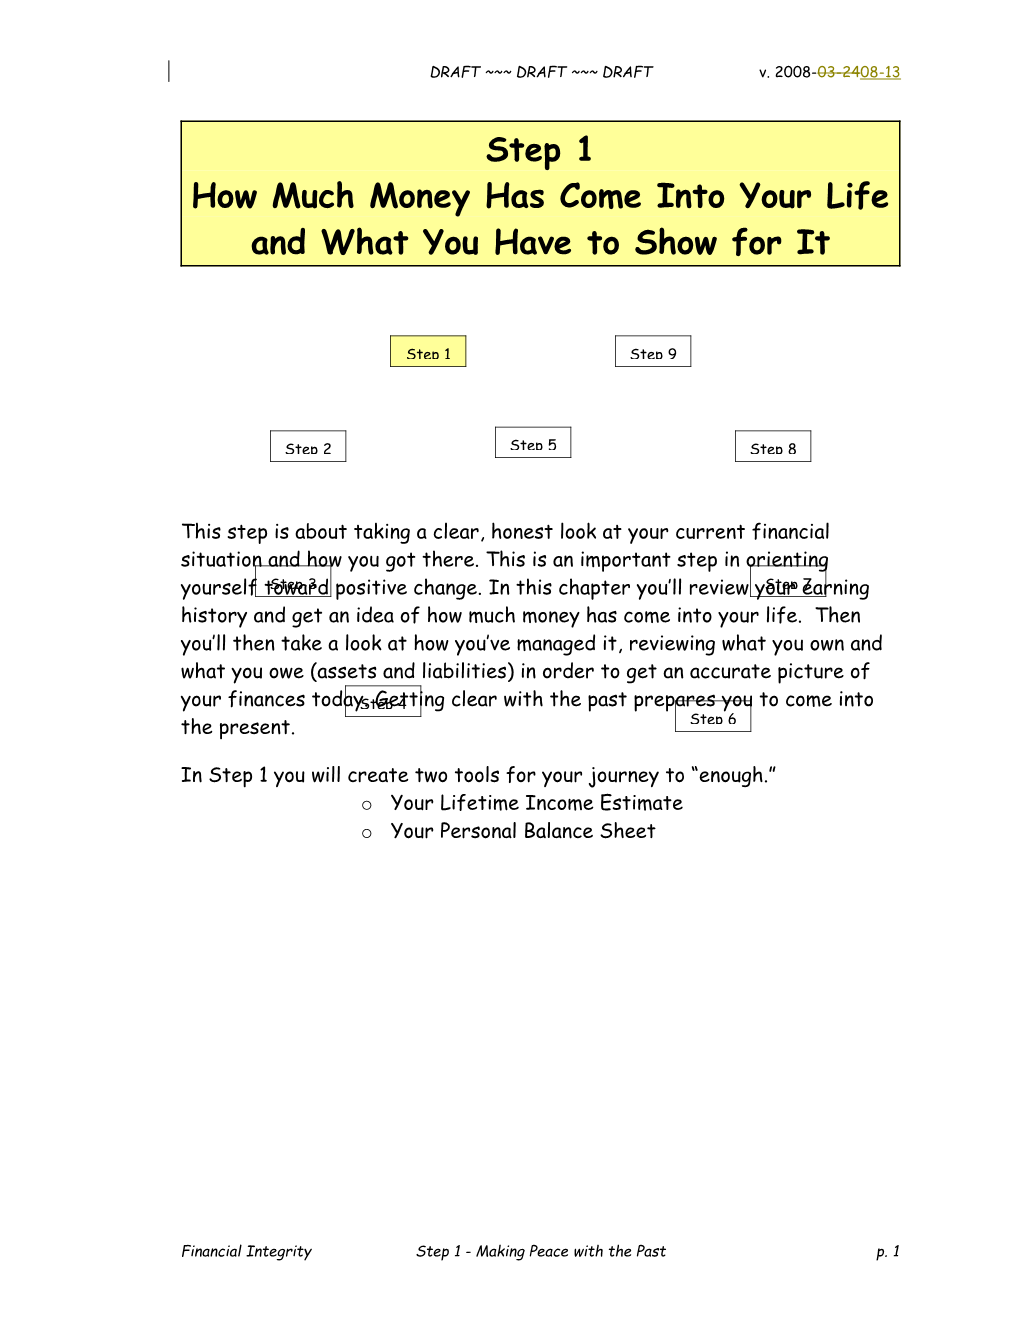 How Much Money Has Come Intoyour Life